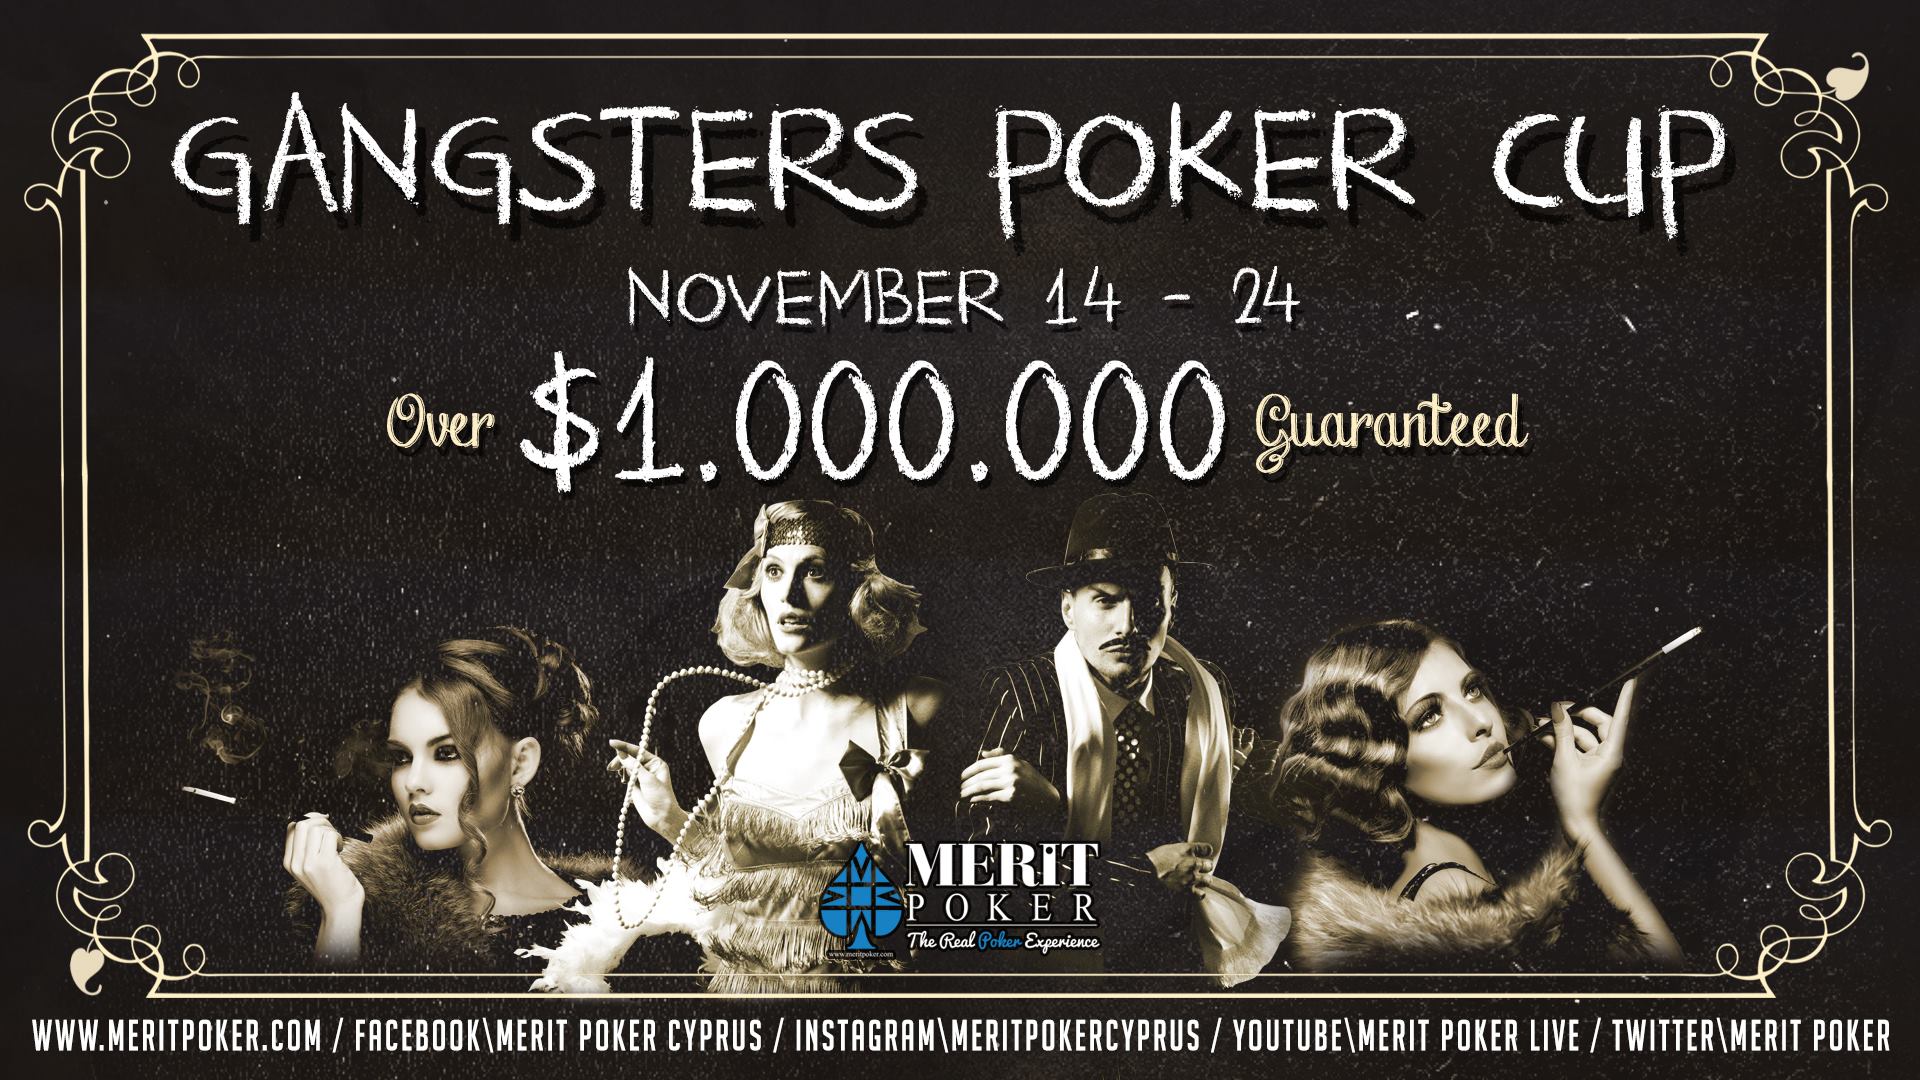 Gangsters Poker Cup on November 14-24